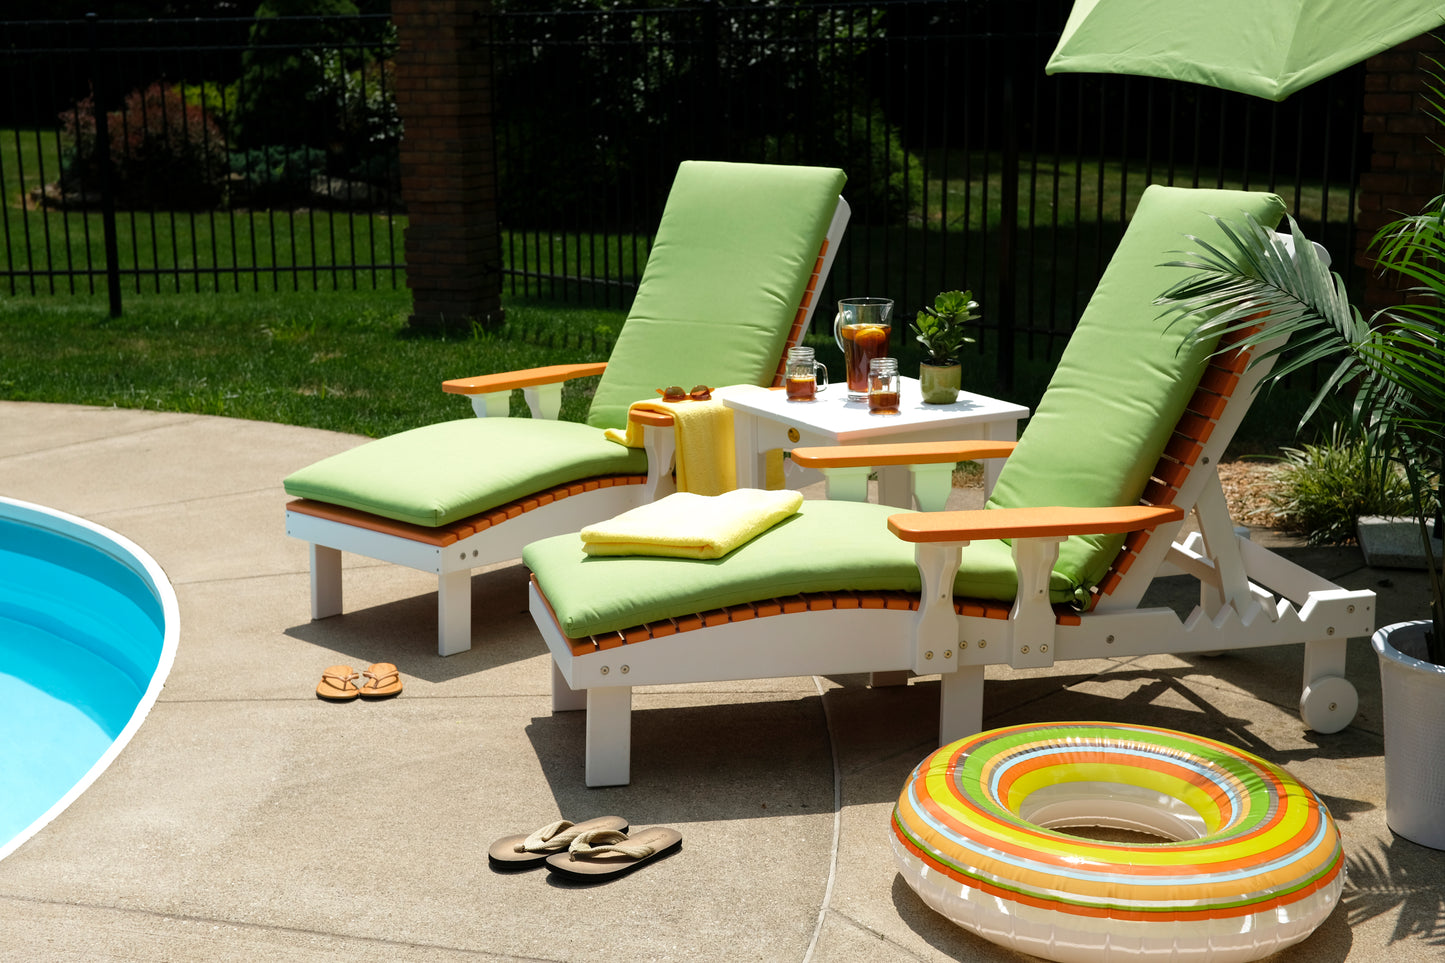 LuxCraft Recycled Plastic Lounge Chair  - LEAD TIME TO SHIP 10 to 12 BUSINESS DAYS